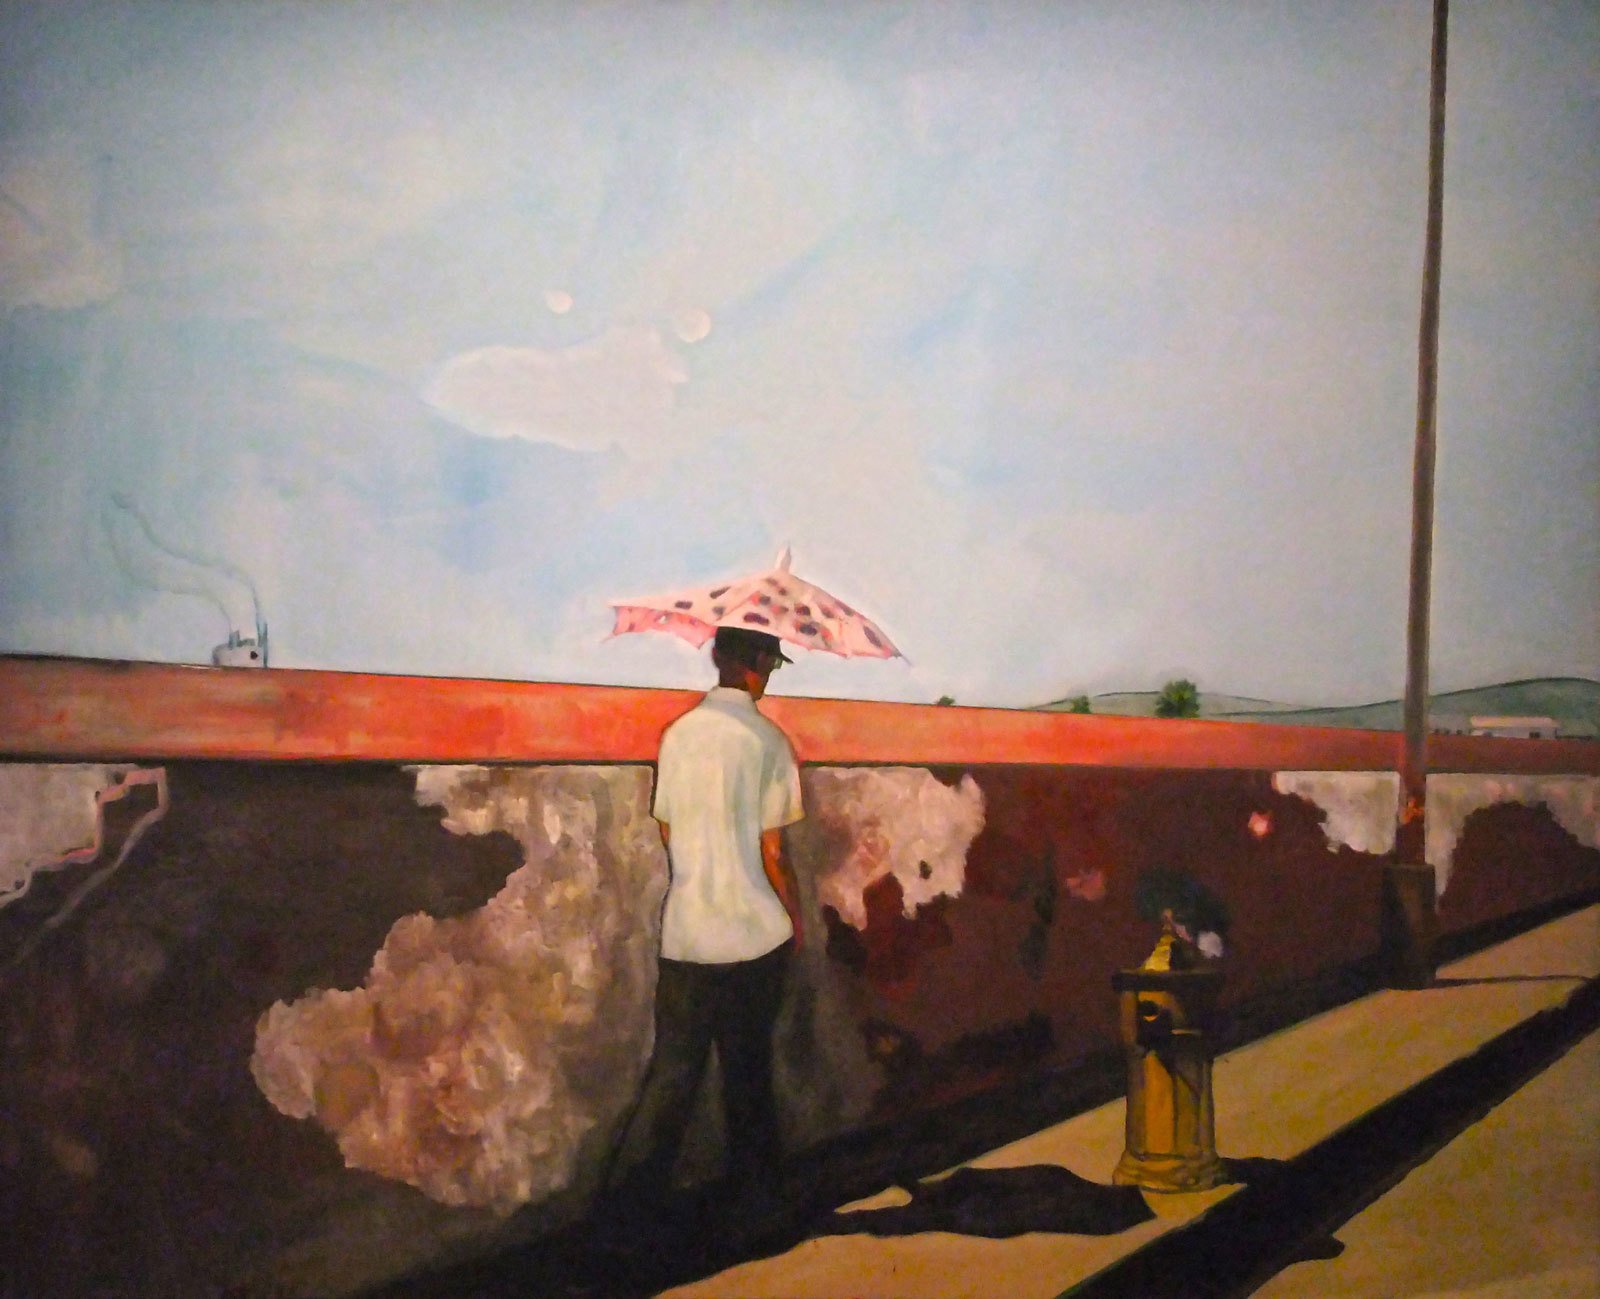 Peter Doig. Lapeyrouse Wall. 2004